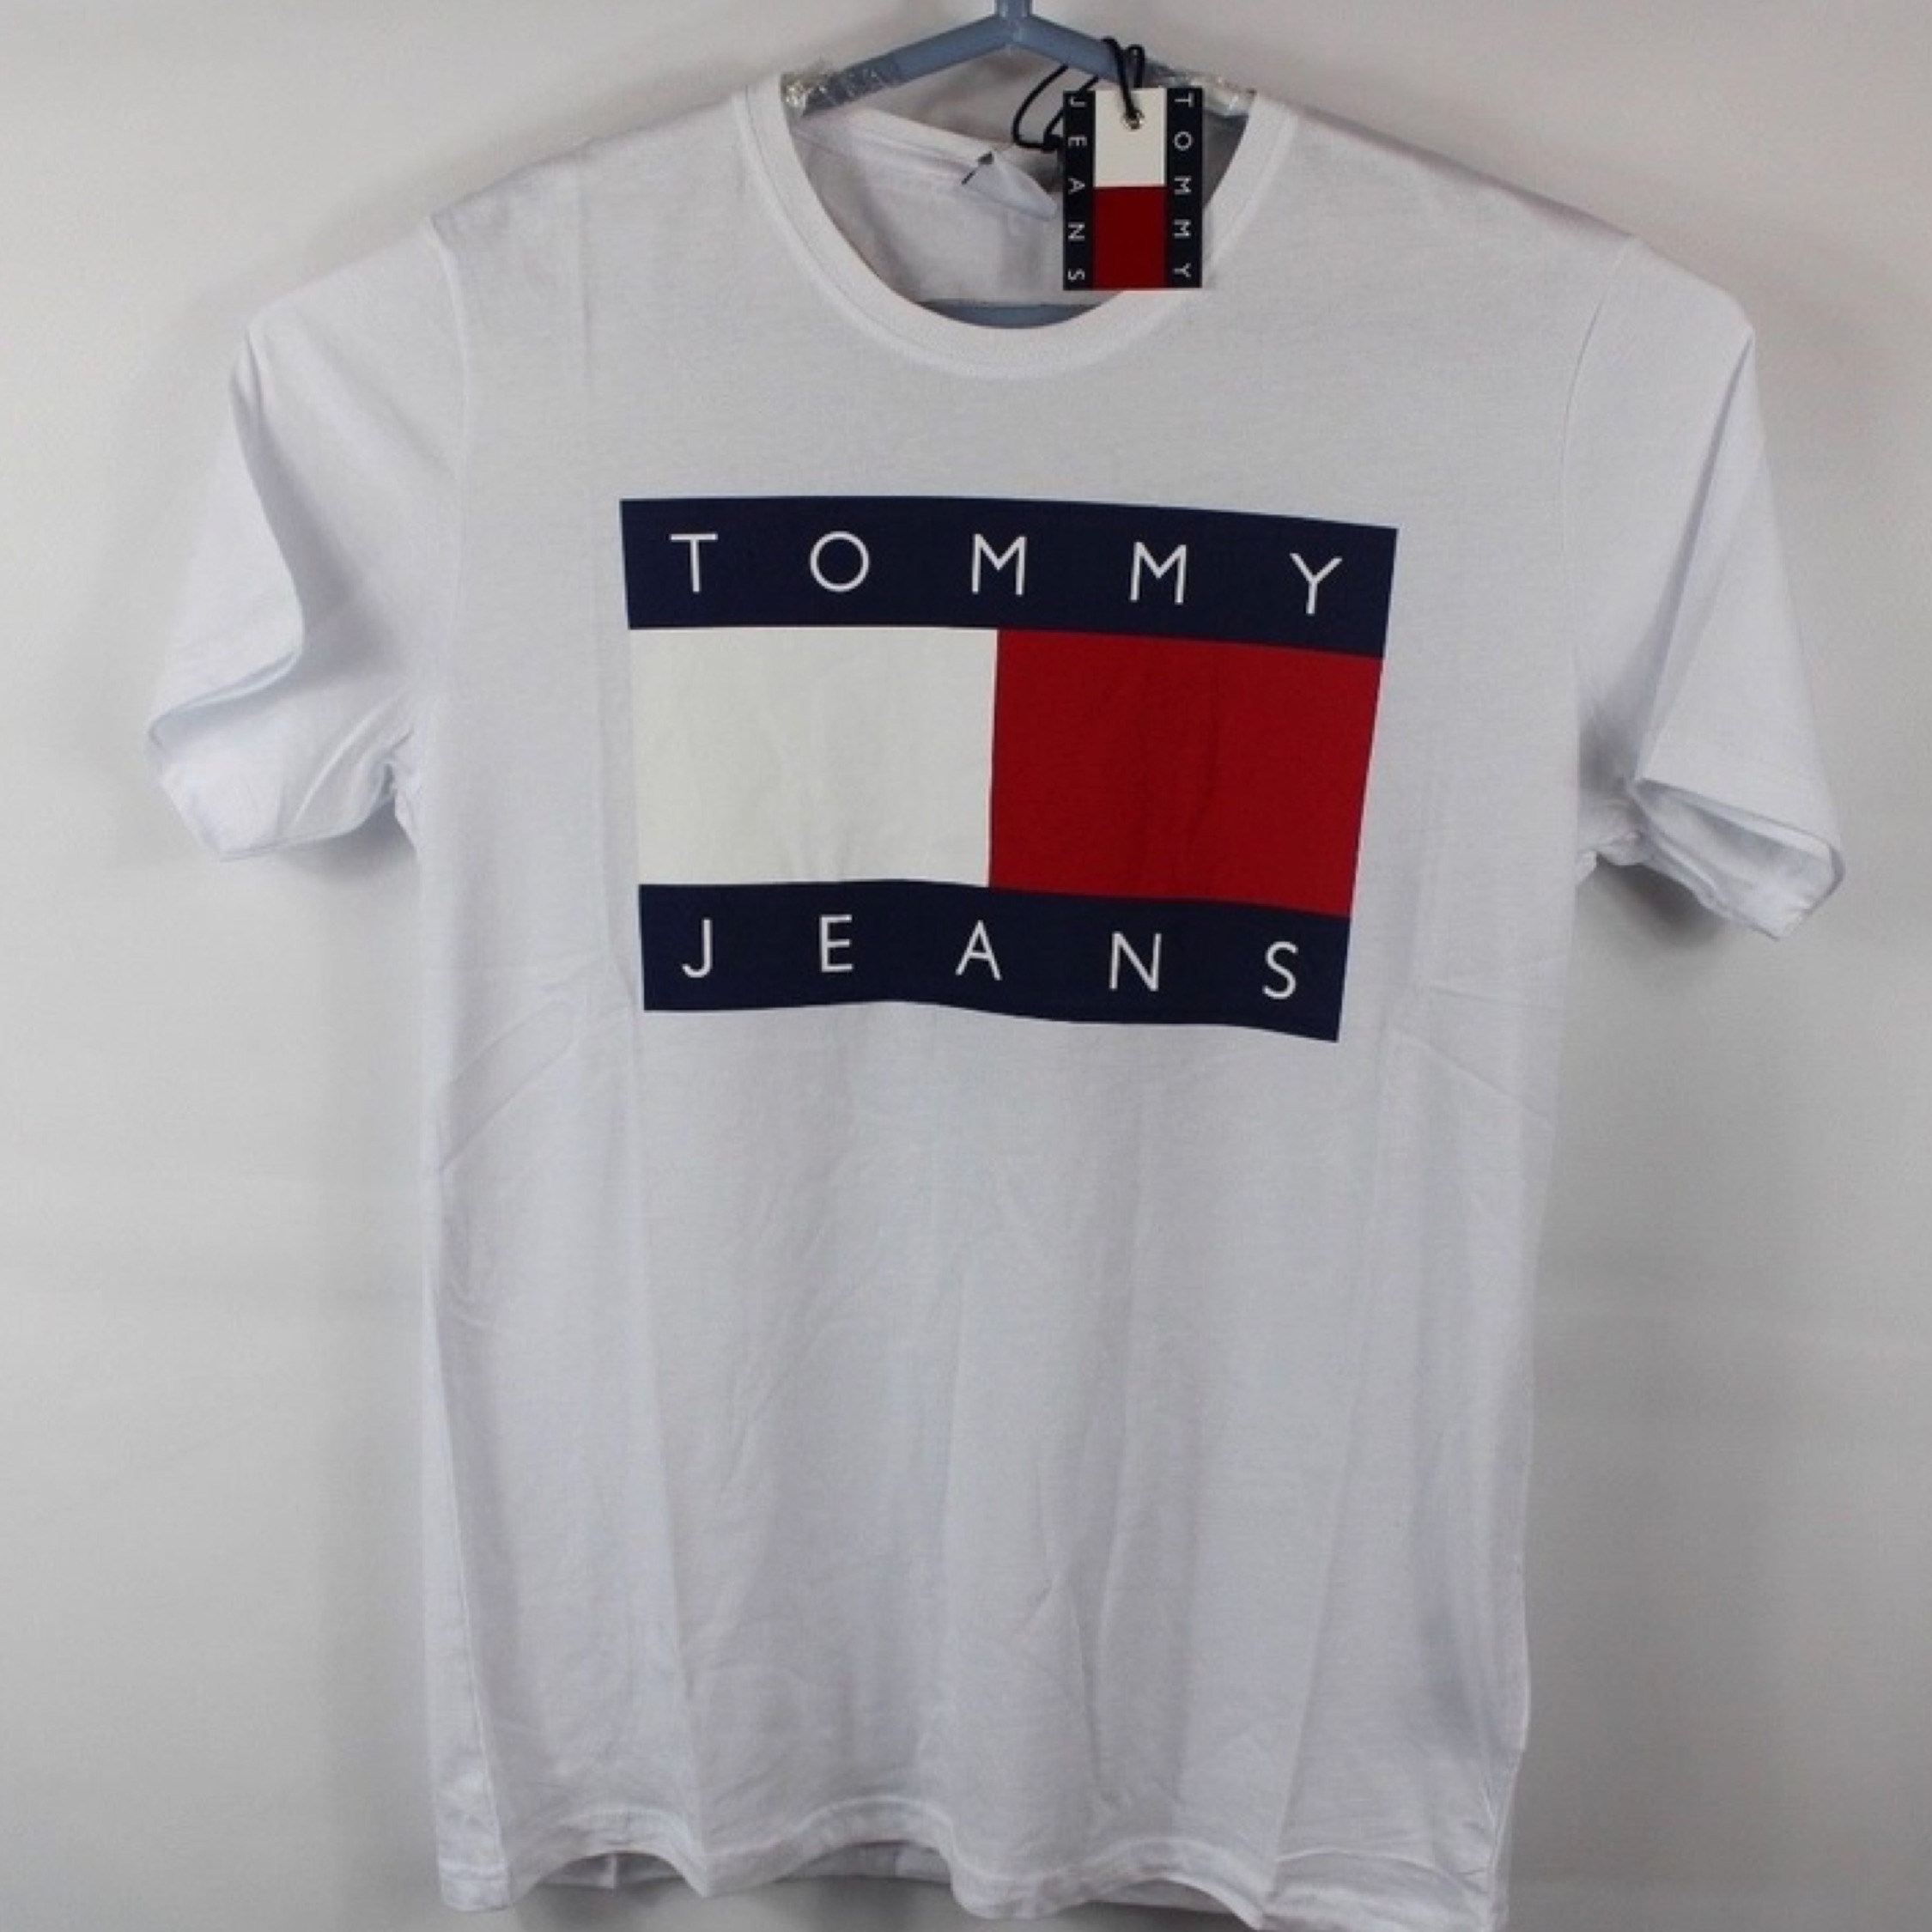 tommy hilfiger tshirt logo 10 free Cliparts | Download images on ...